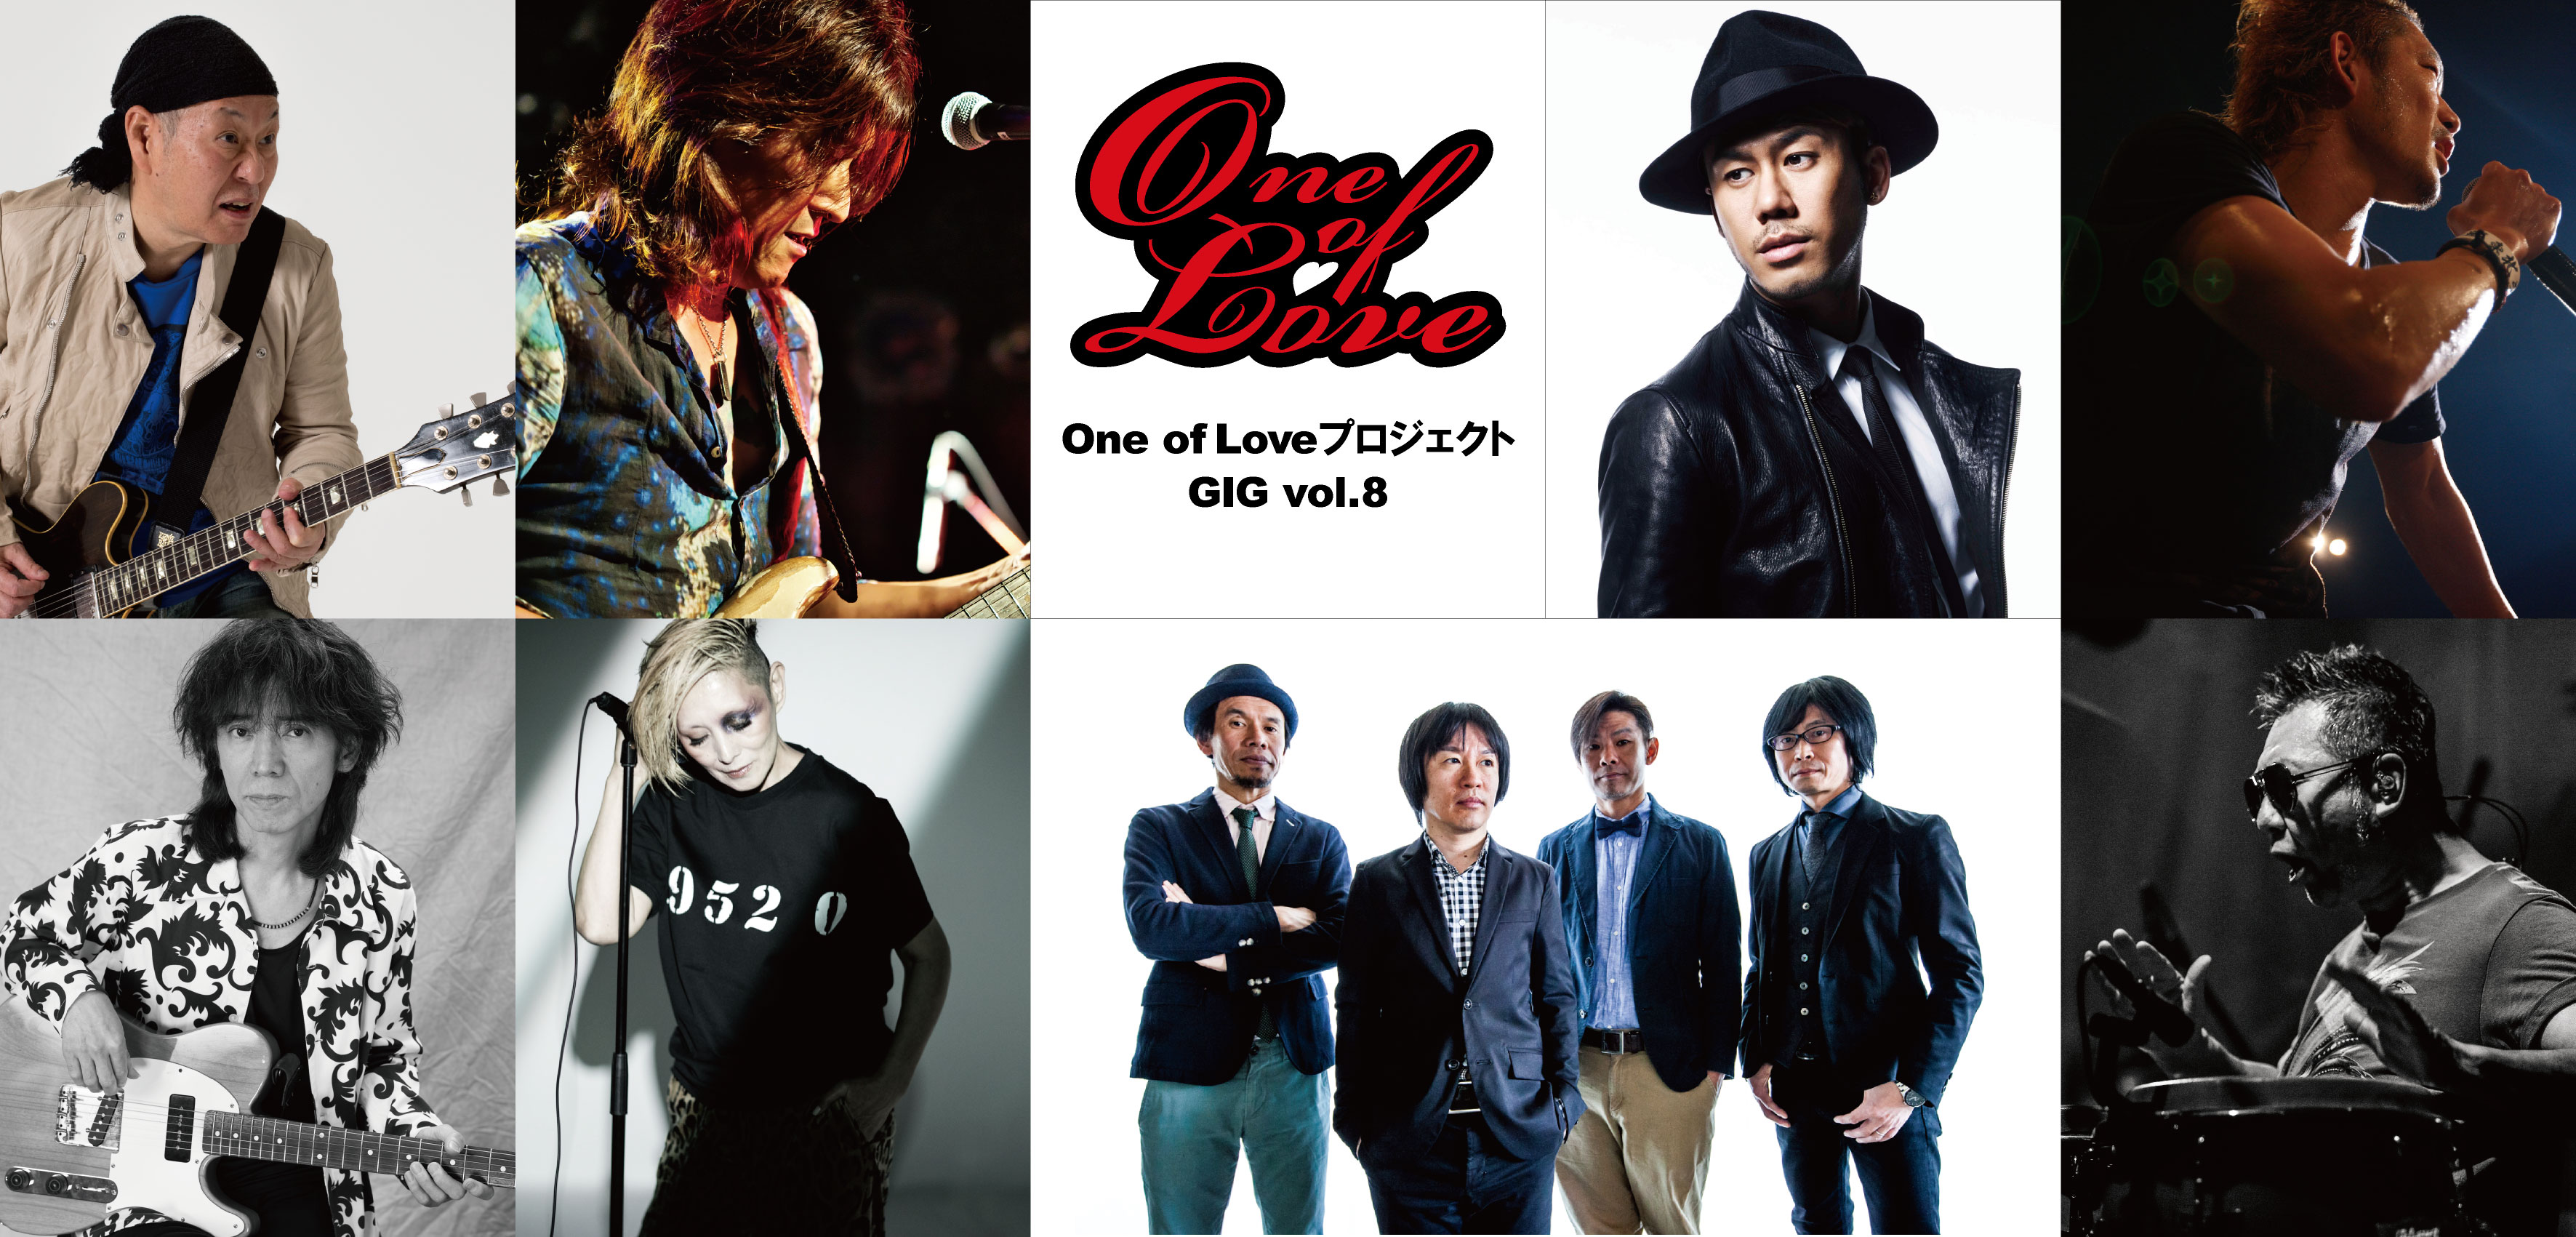 One of Love vol.8